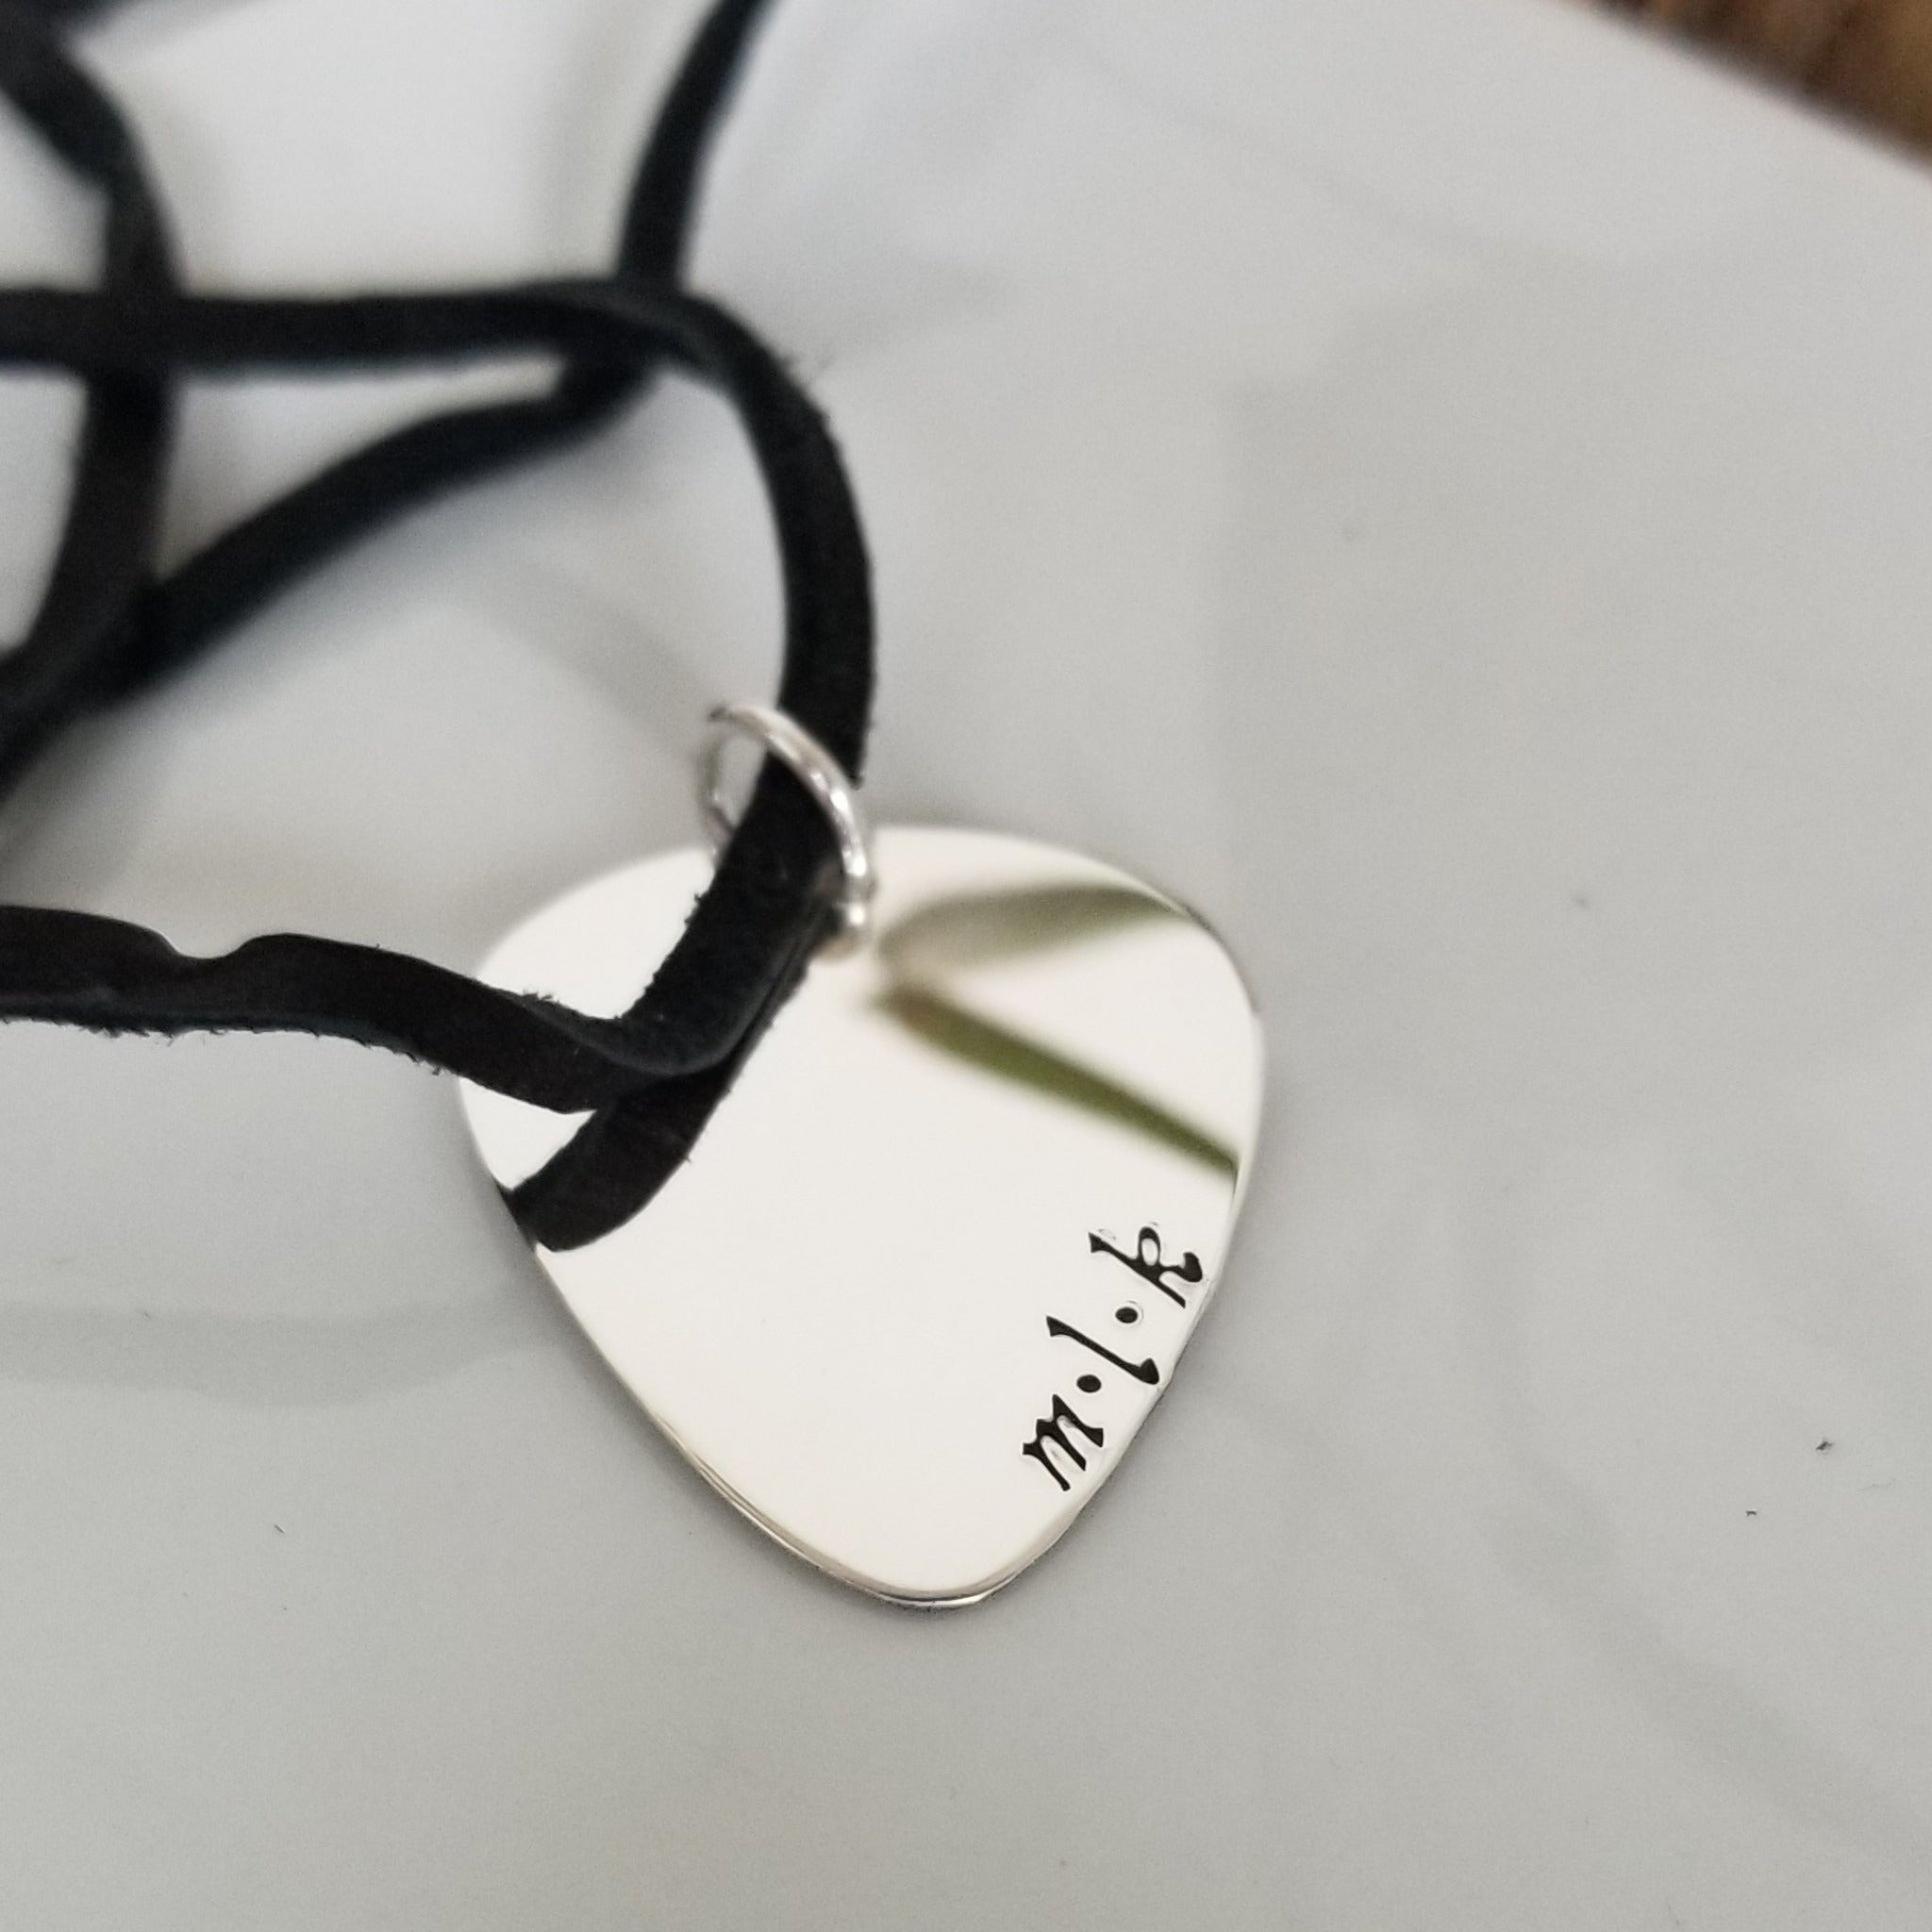 Custom Guitar Pick Necklace - Sterling Silver